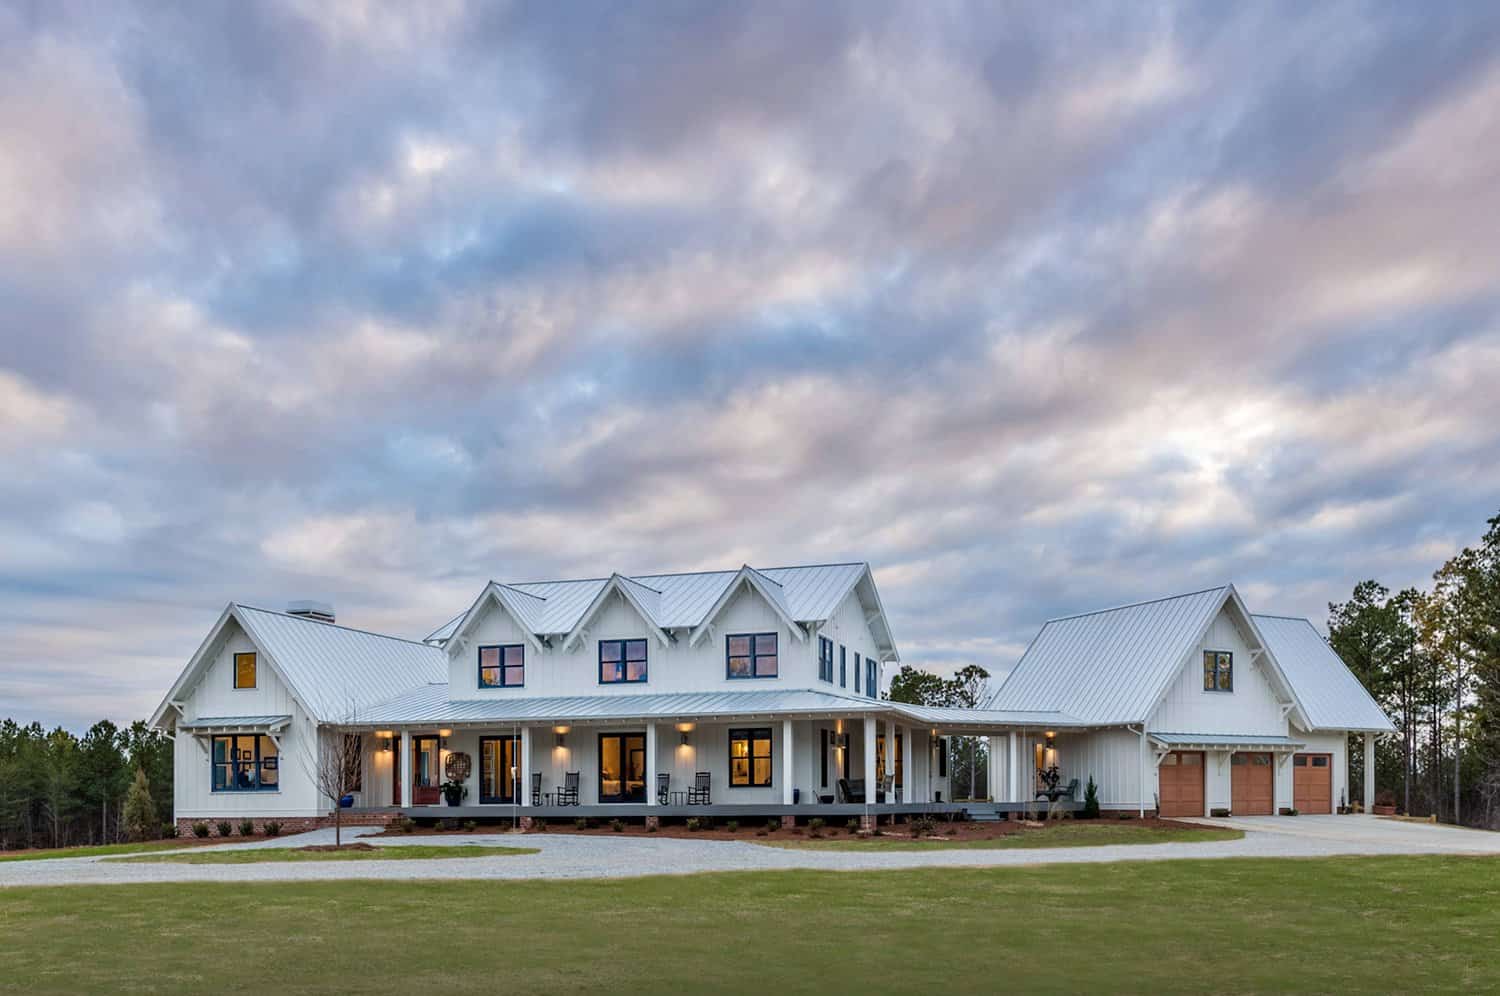 Step inside this bright and airy modern farmhouse in South Carolina